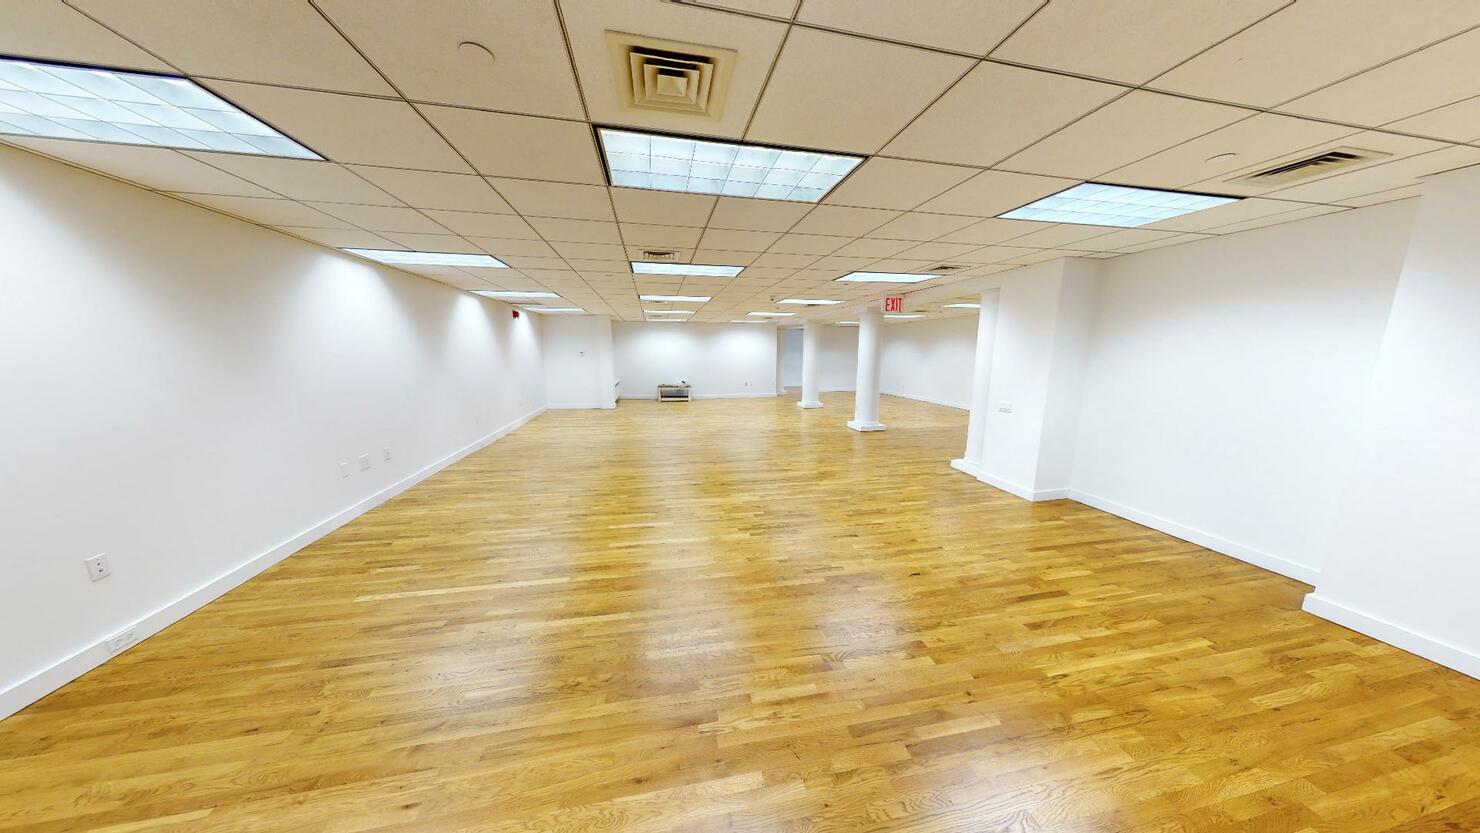 3,592 SF office space for lease at 483 10th Avenue, in close proximity to Hudson Yards.